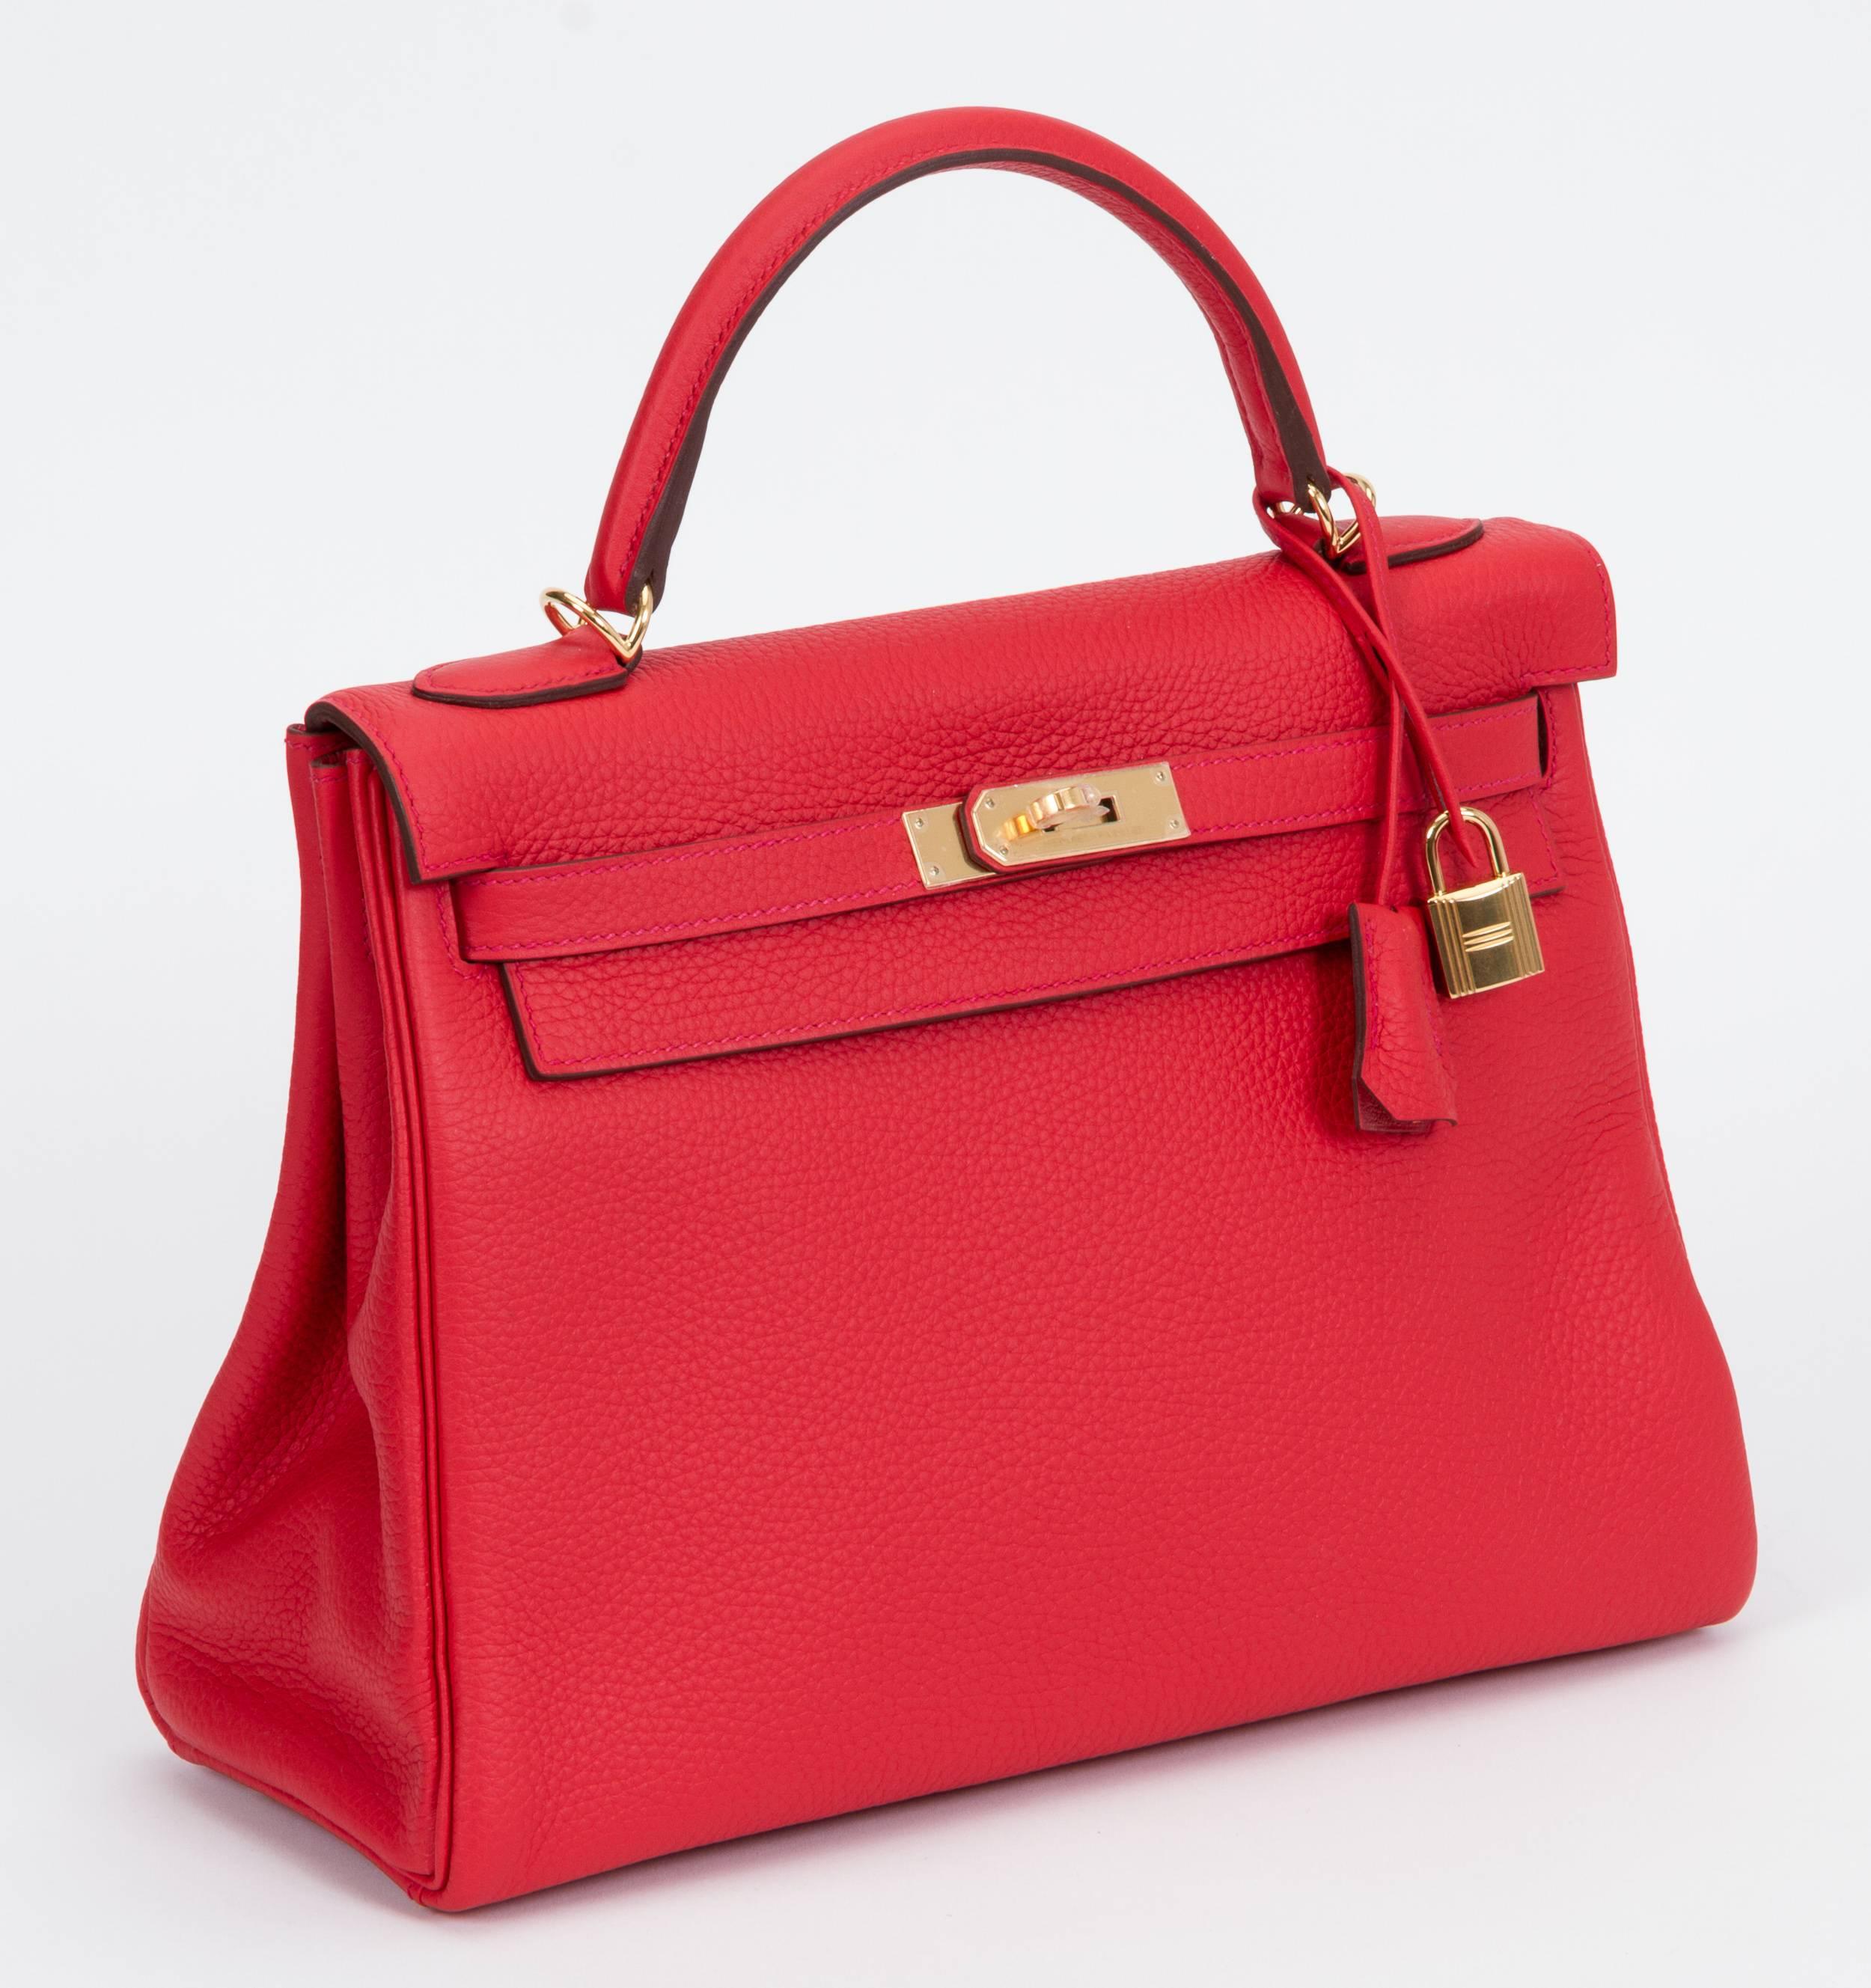 Hermès Kelly retourne 32cm in rouge tomate tourillon clemence leather and gold tone hardware. Handle drop, 3.5